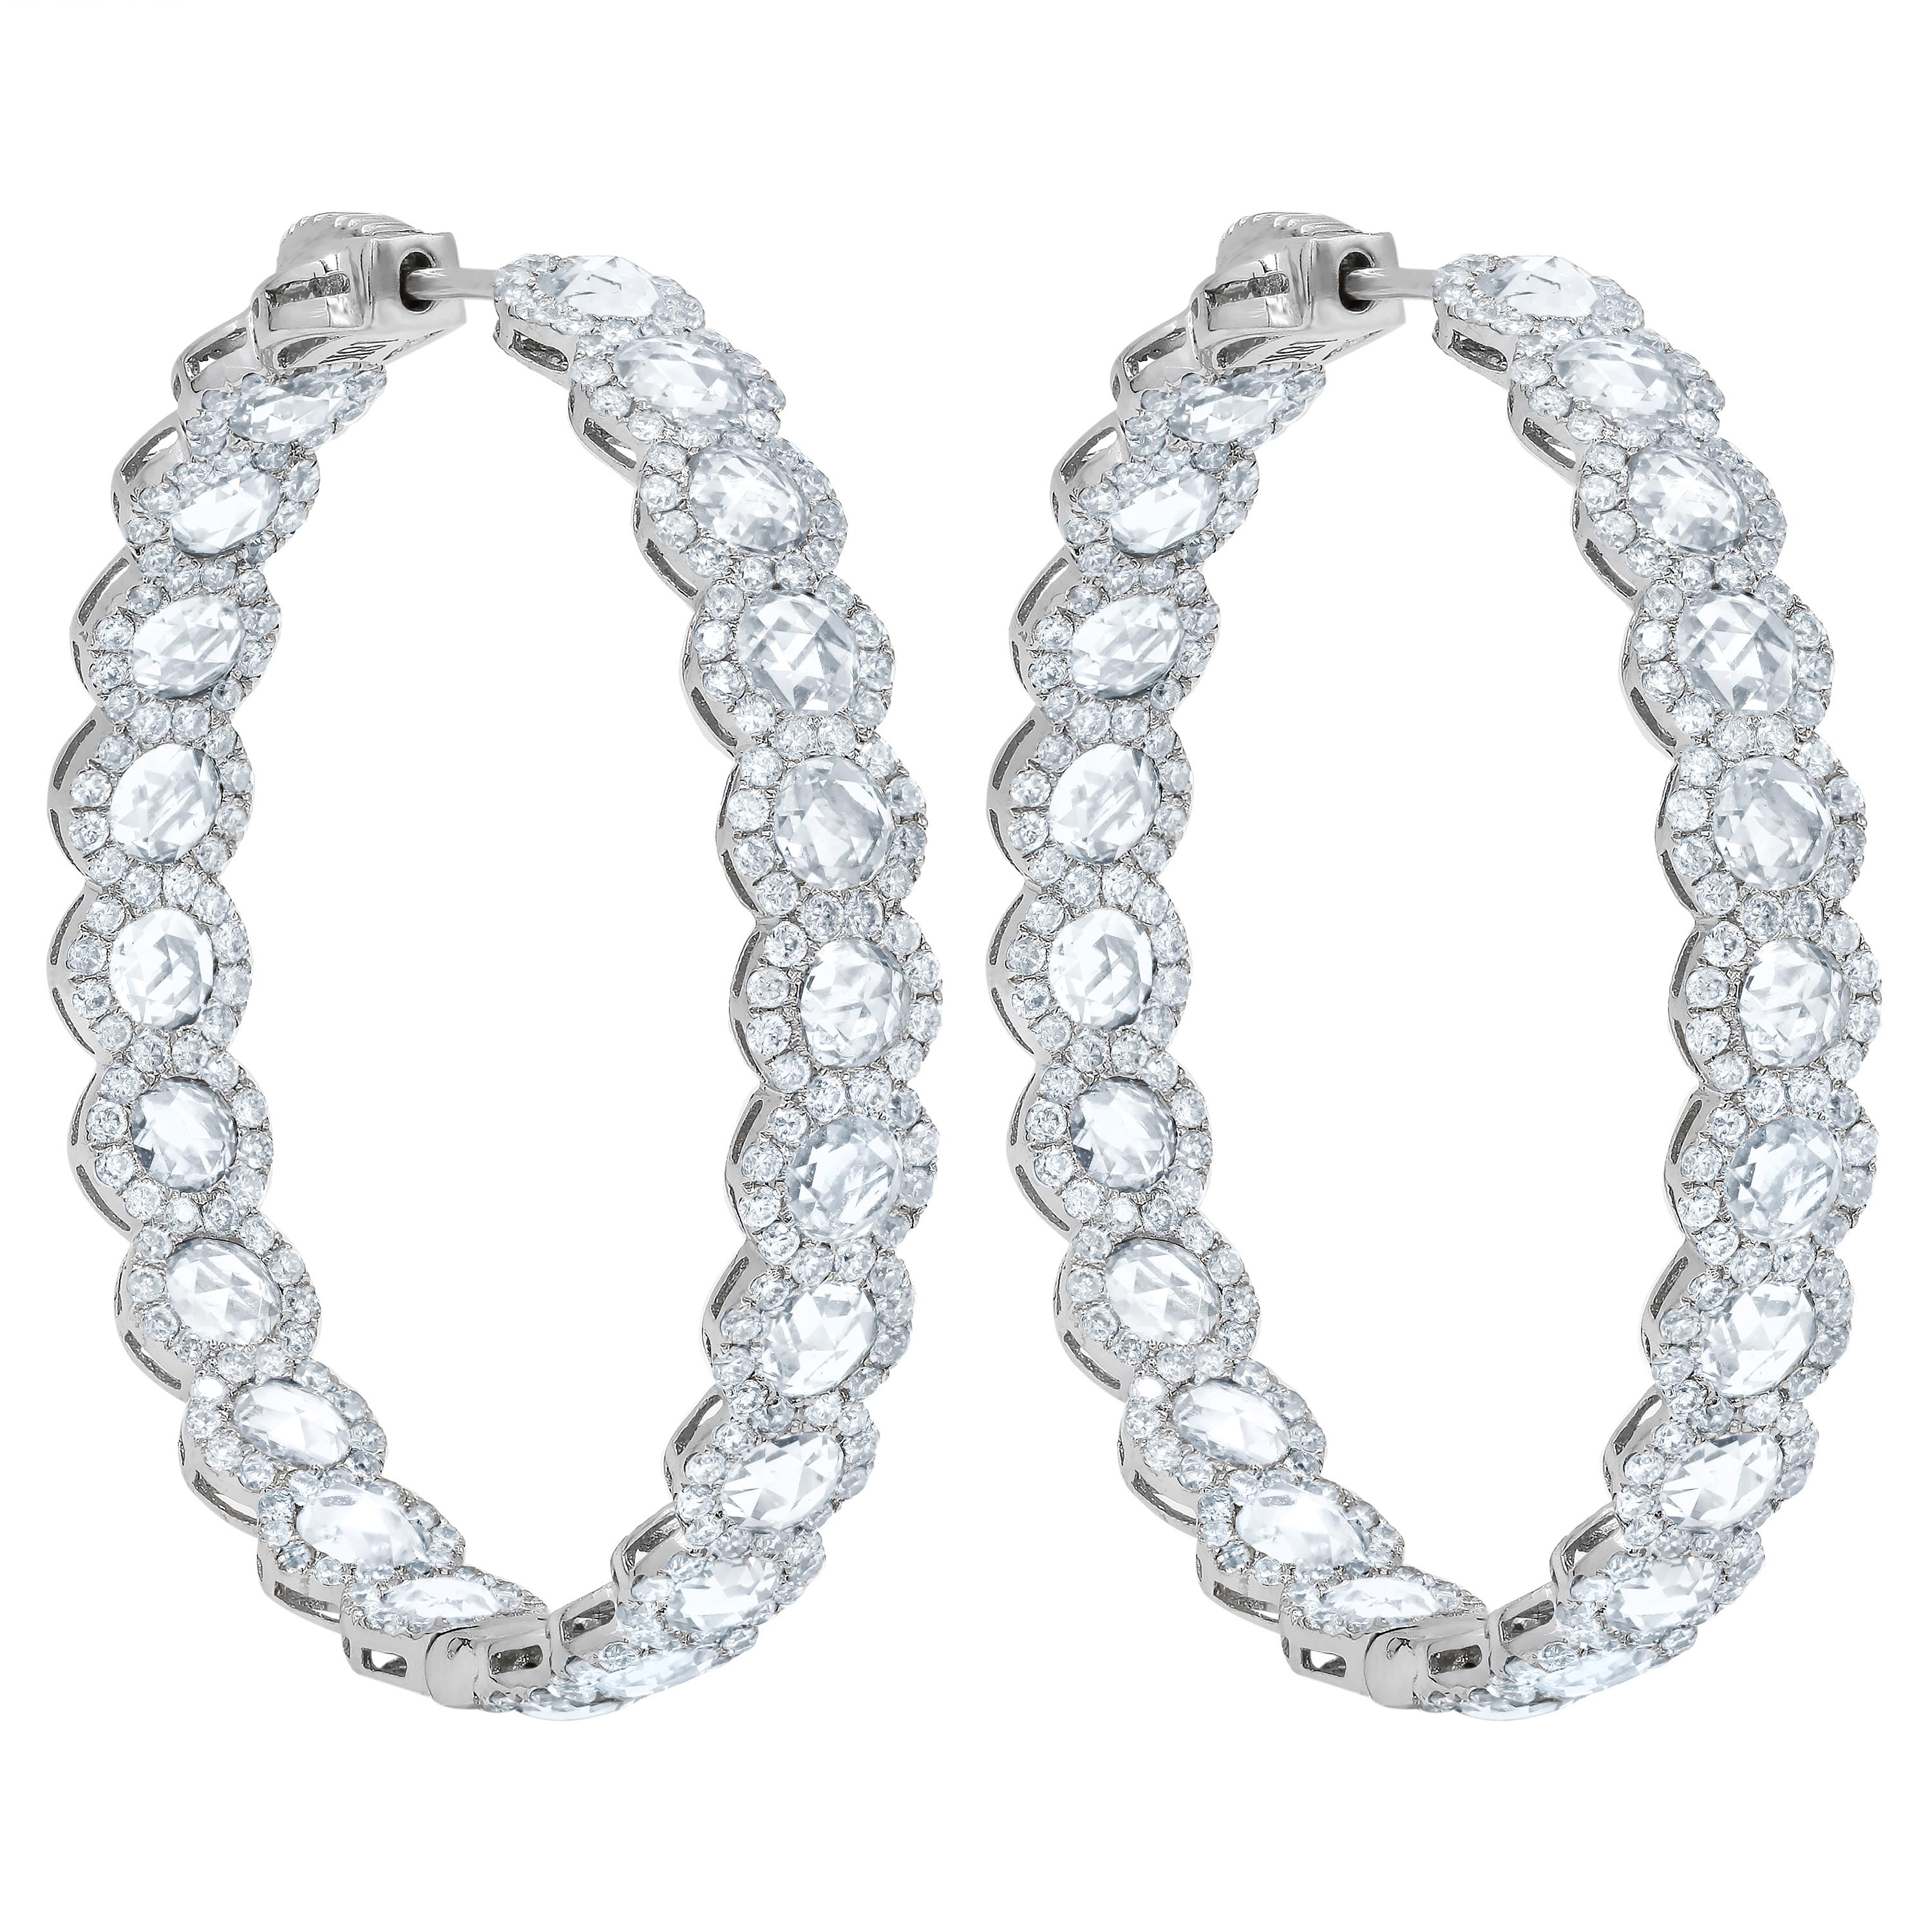 18 kt white gold inside-out hoop earrings with halo design adorned with 5.90 cts tw of diamonds surrounded by smaller diamonds
Diana M. is a leading supplier of top-quality fine jewelry for over 35 years.
Diana M is one-stop shop for all your